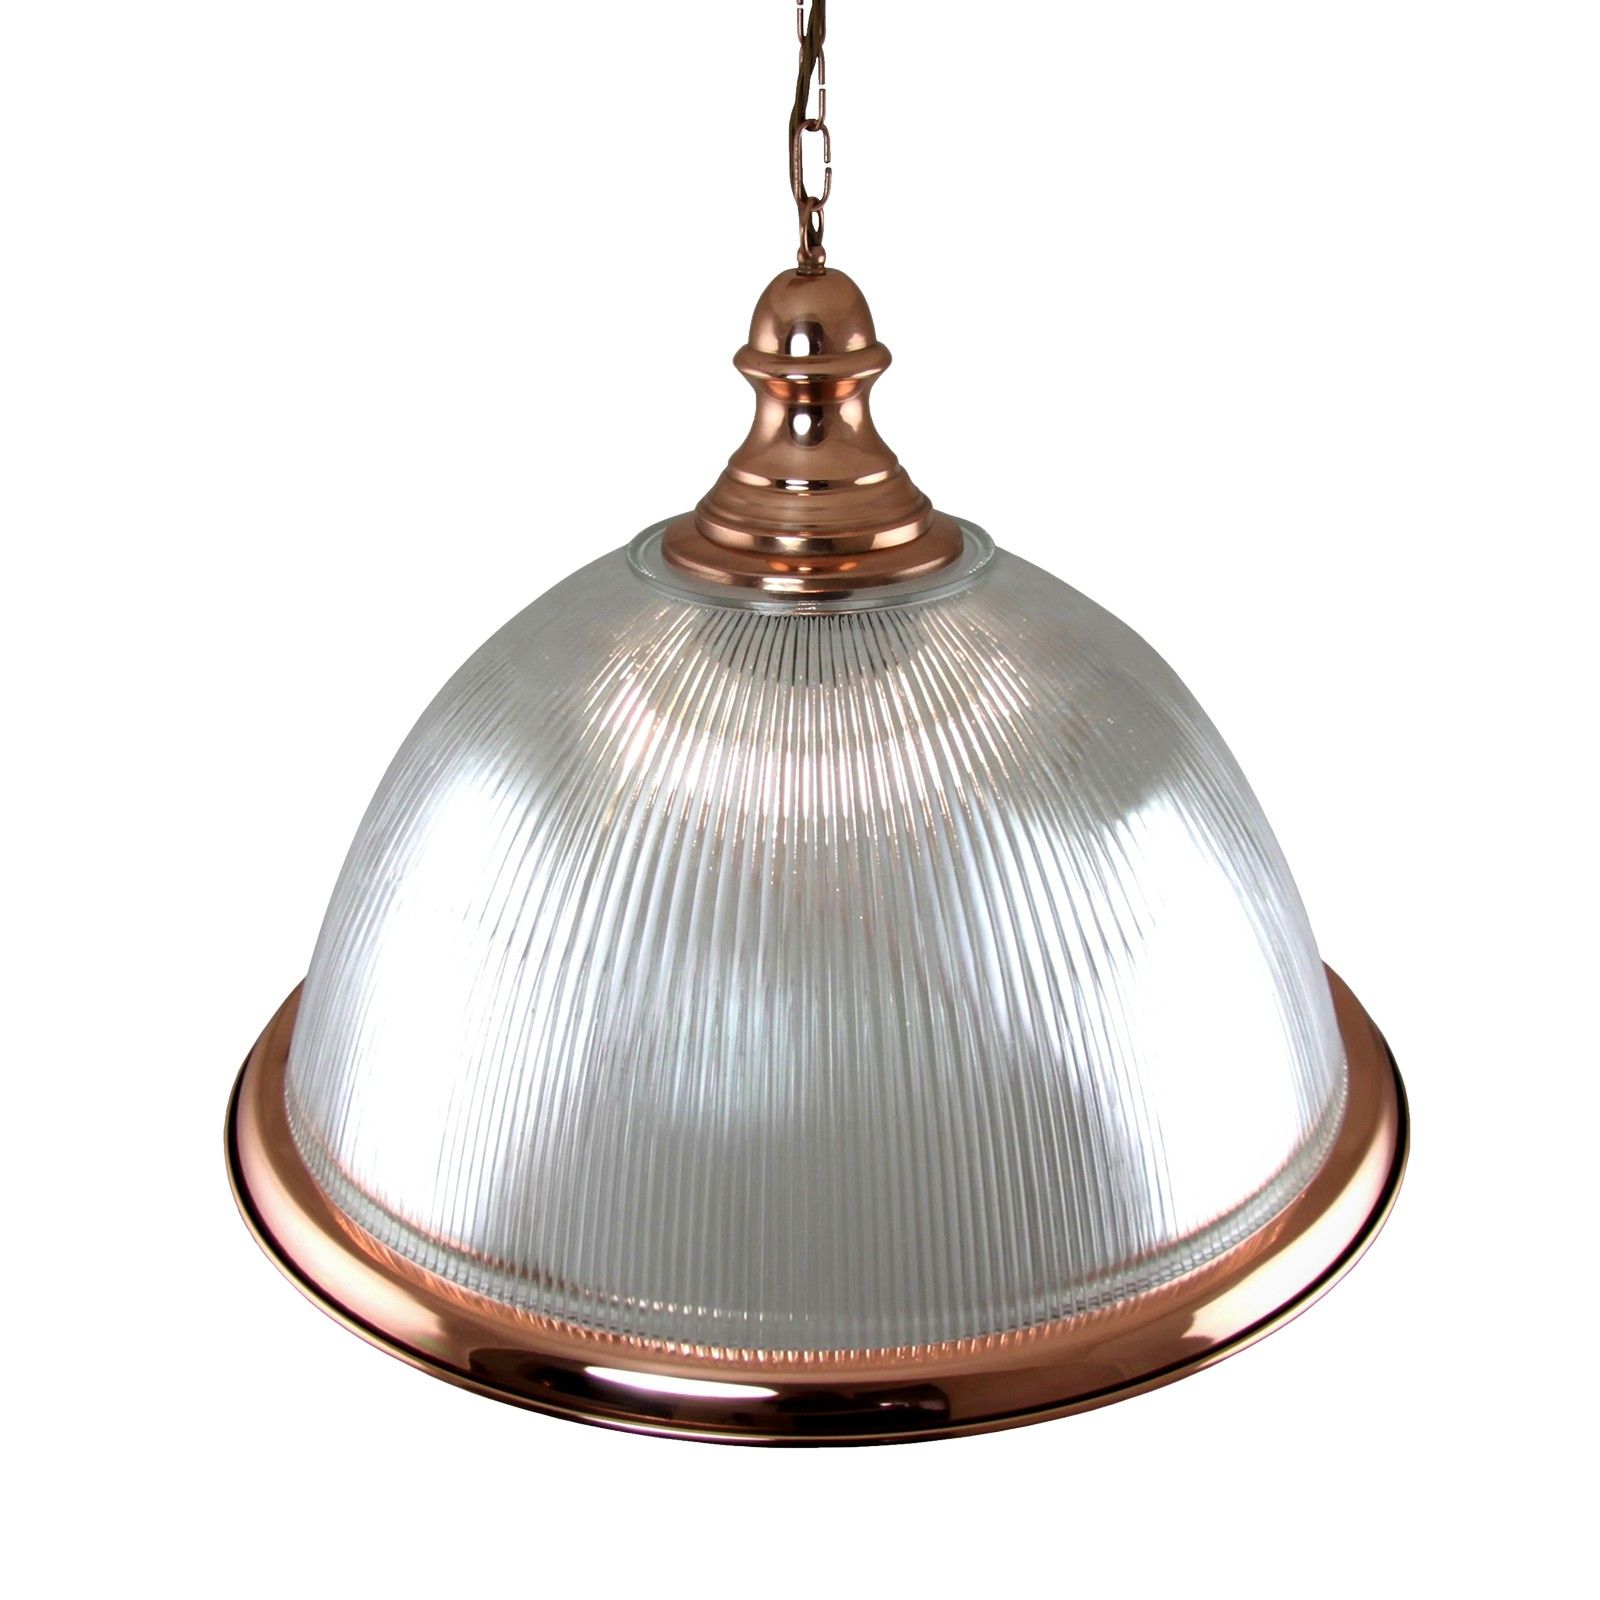 Large dome ceiling light in copper with decorative pendant and copper edging